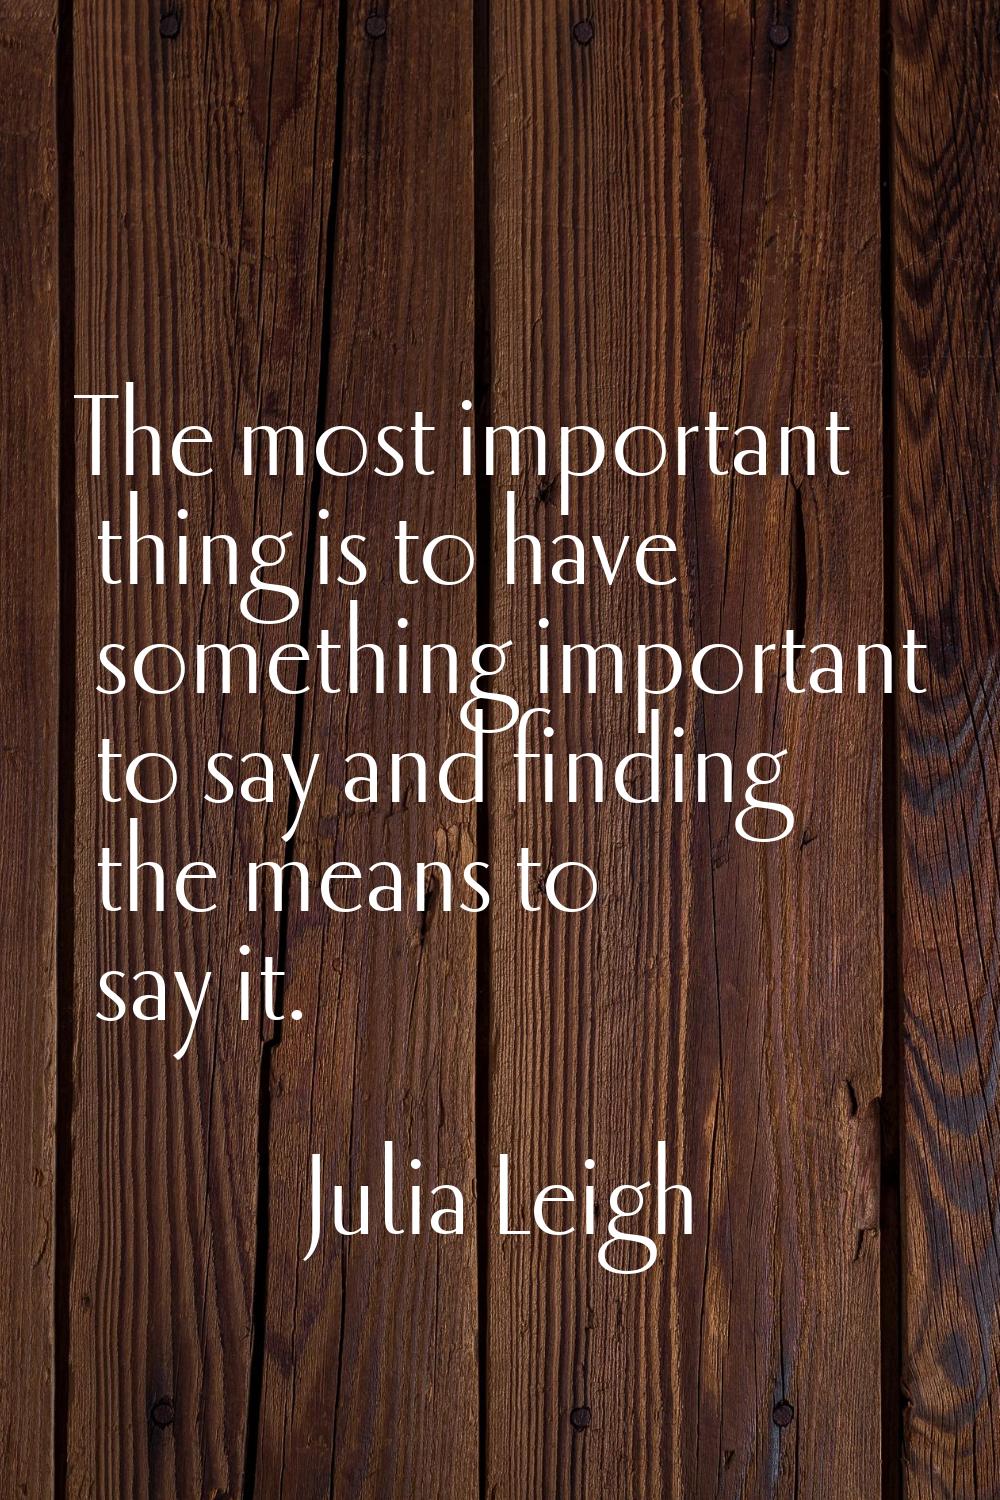 The most important thing is to have something important to say and finding the means to say it.